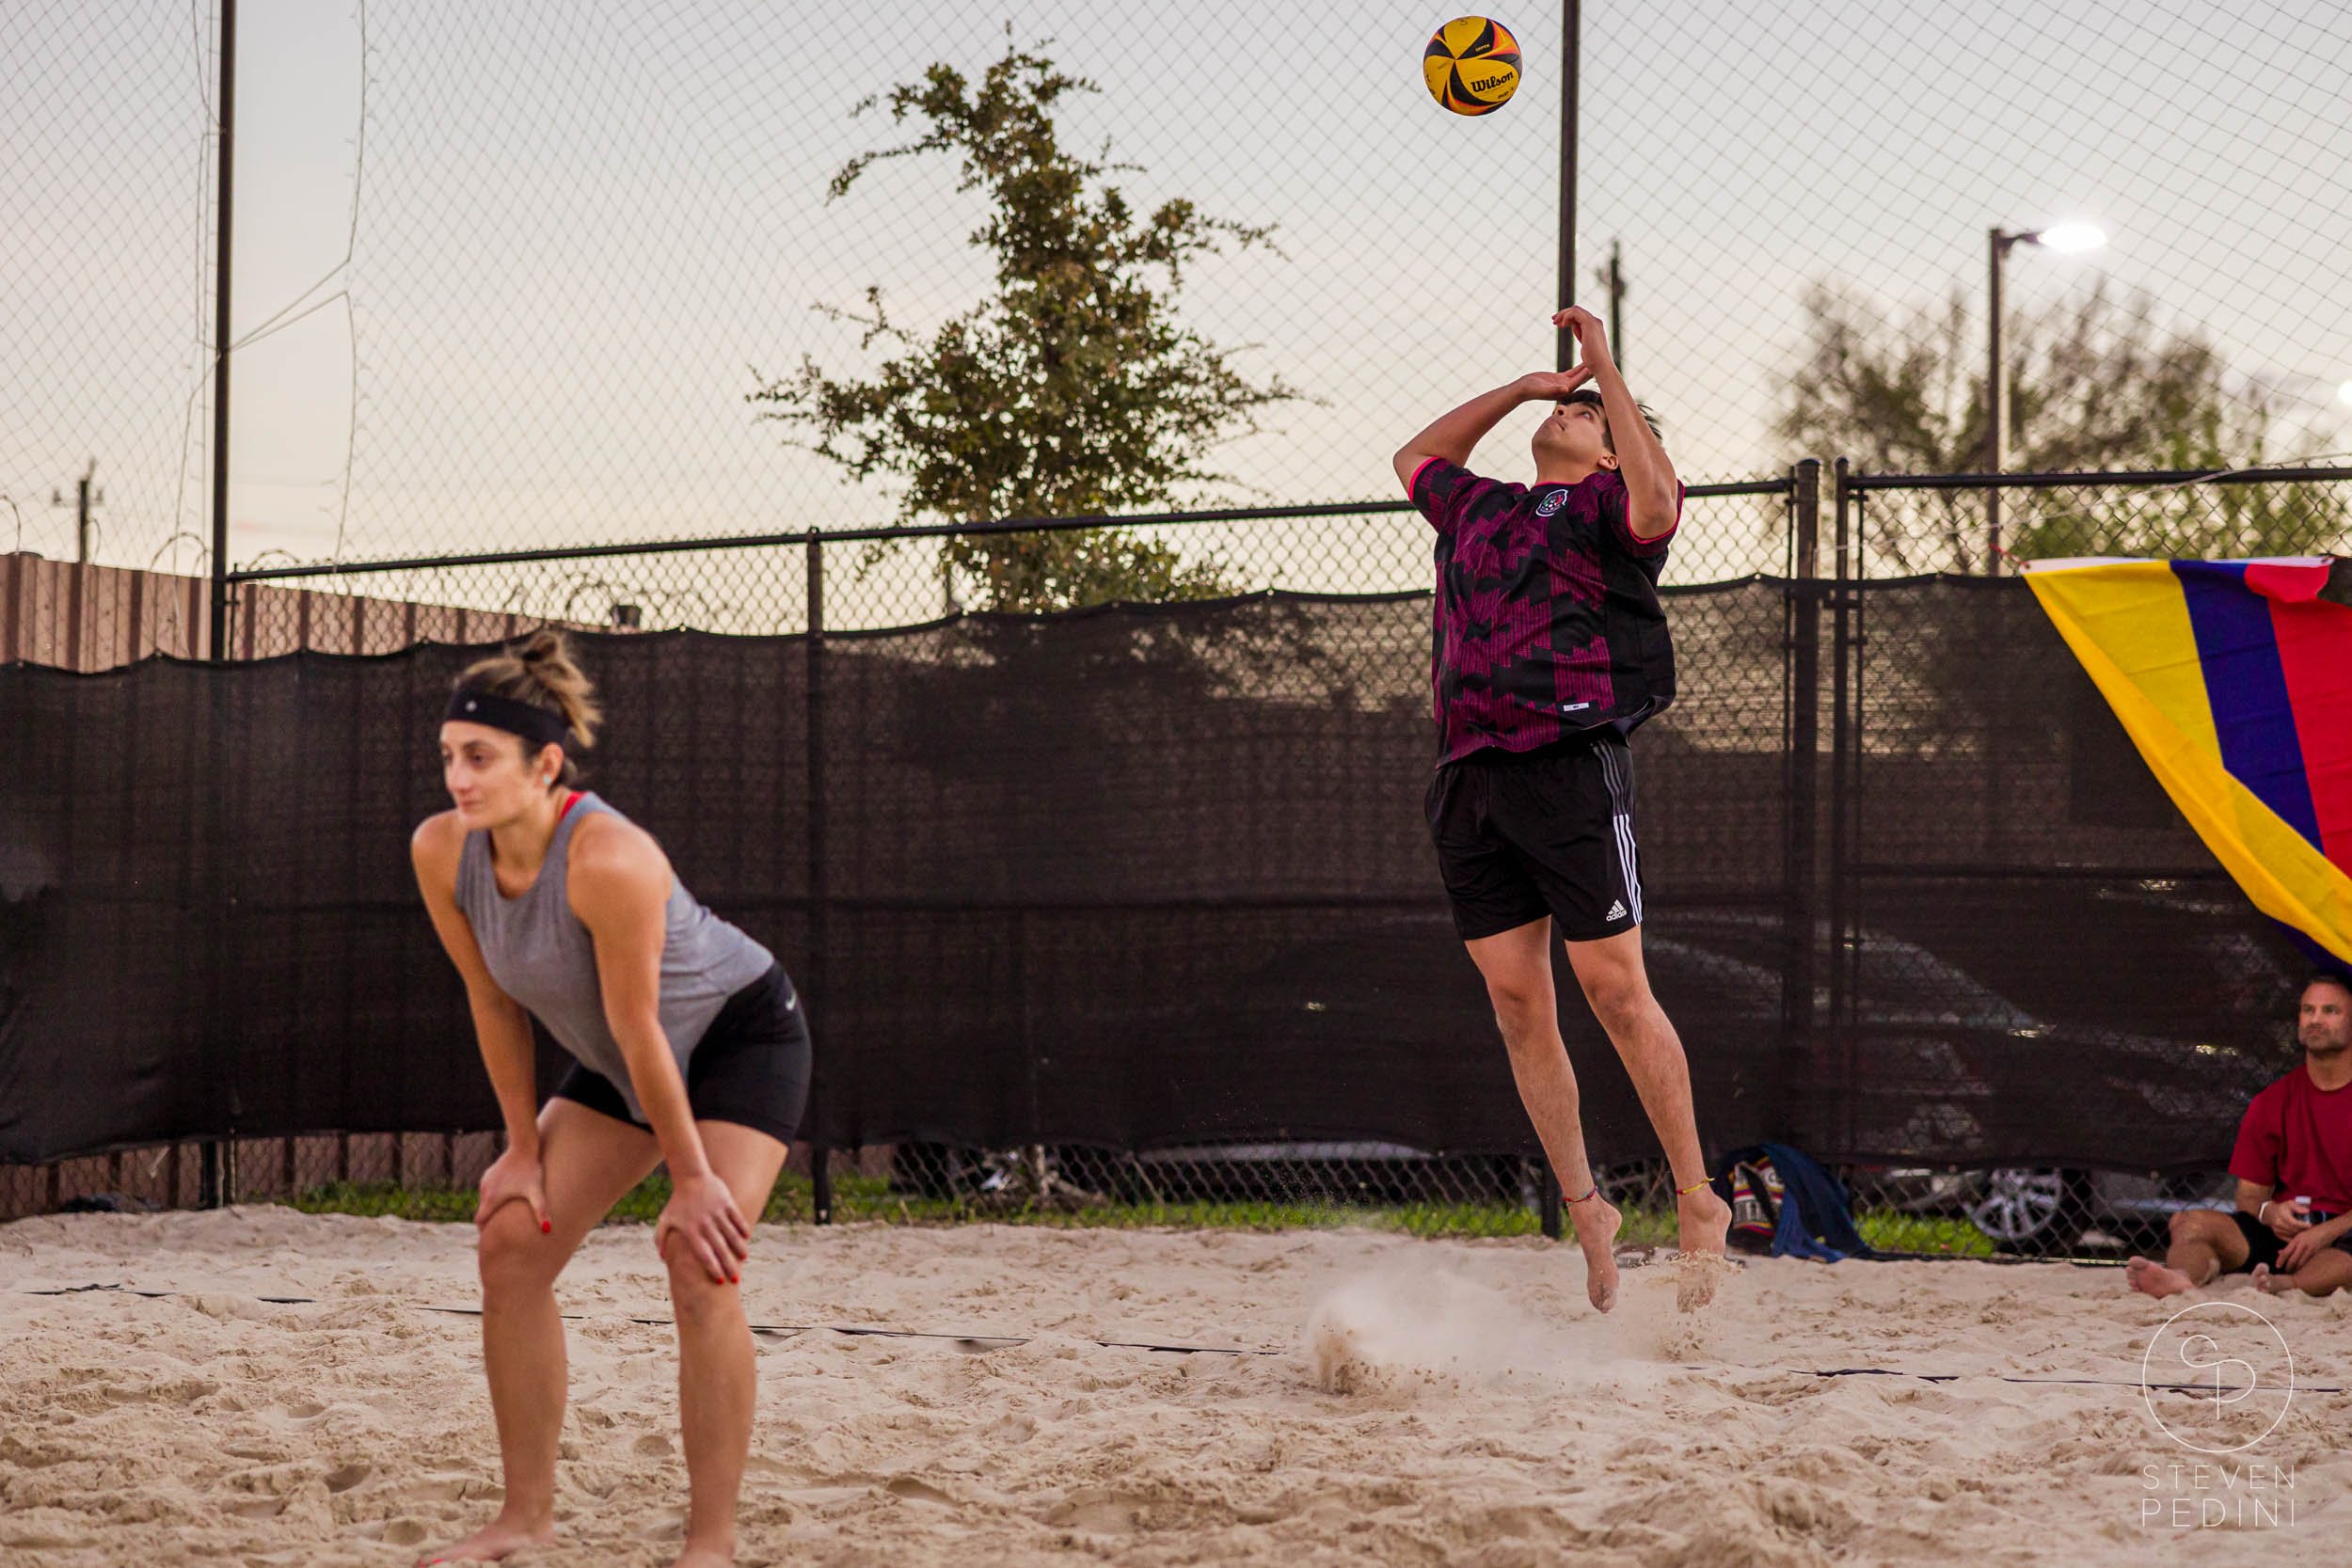 Steven Pedini Photography - Bumpy Pickle - Sand Volleyball - Houston TX - World Cup of Volleyball - 00240.jpg